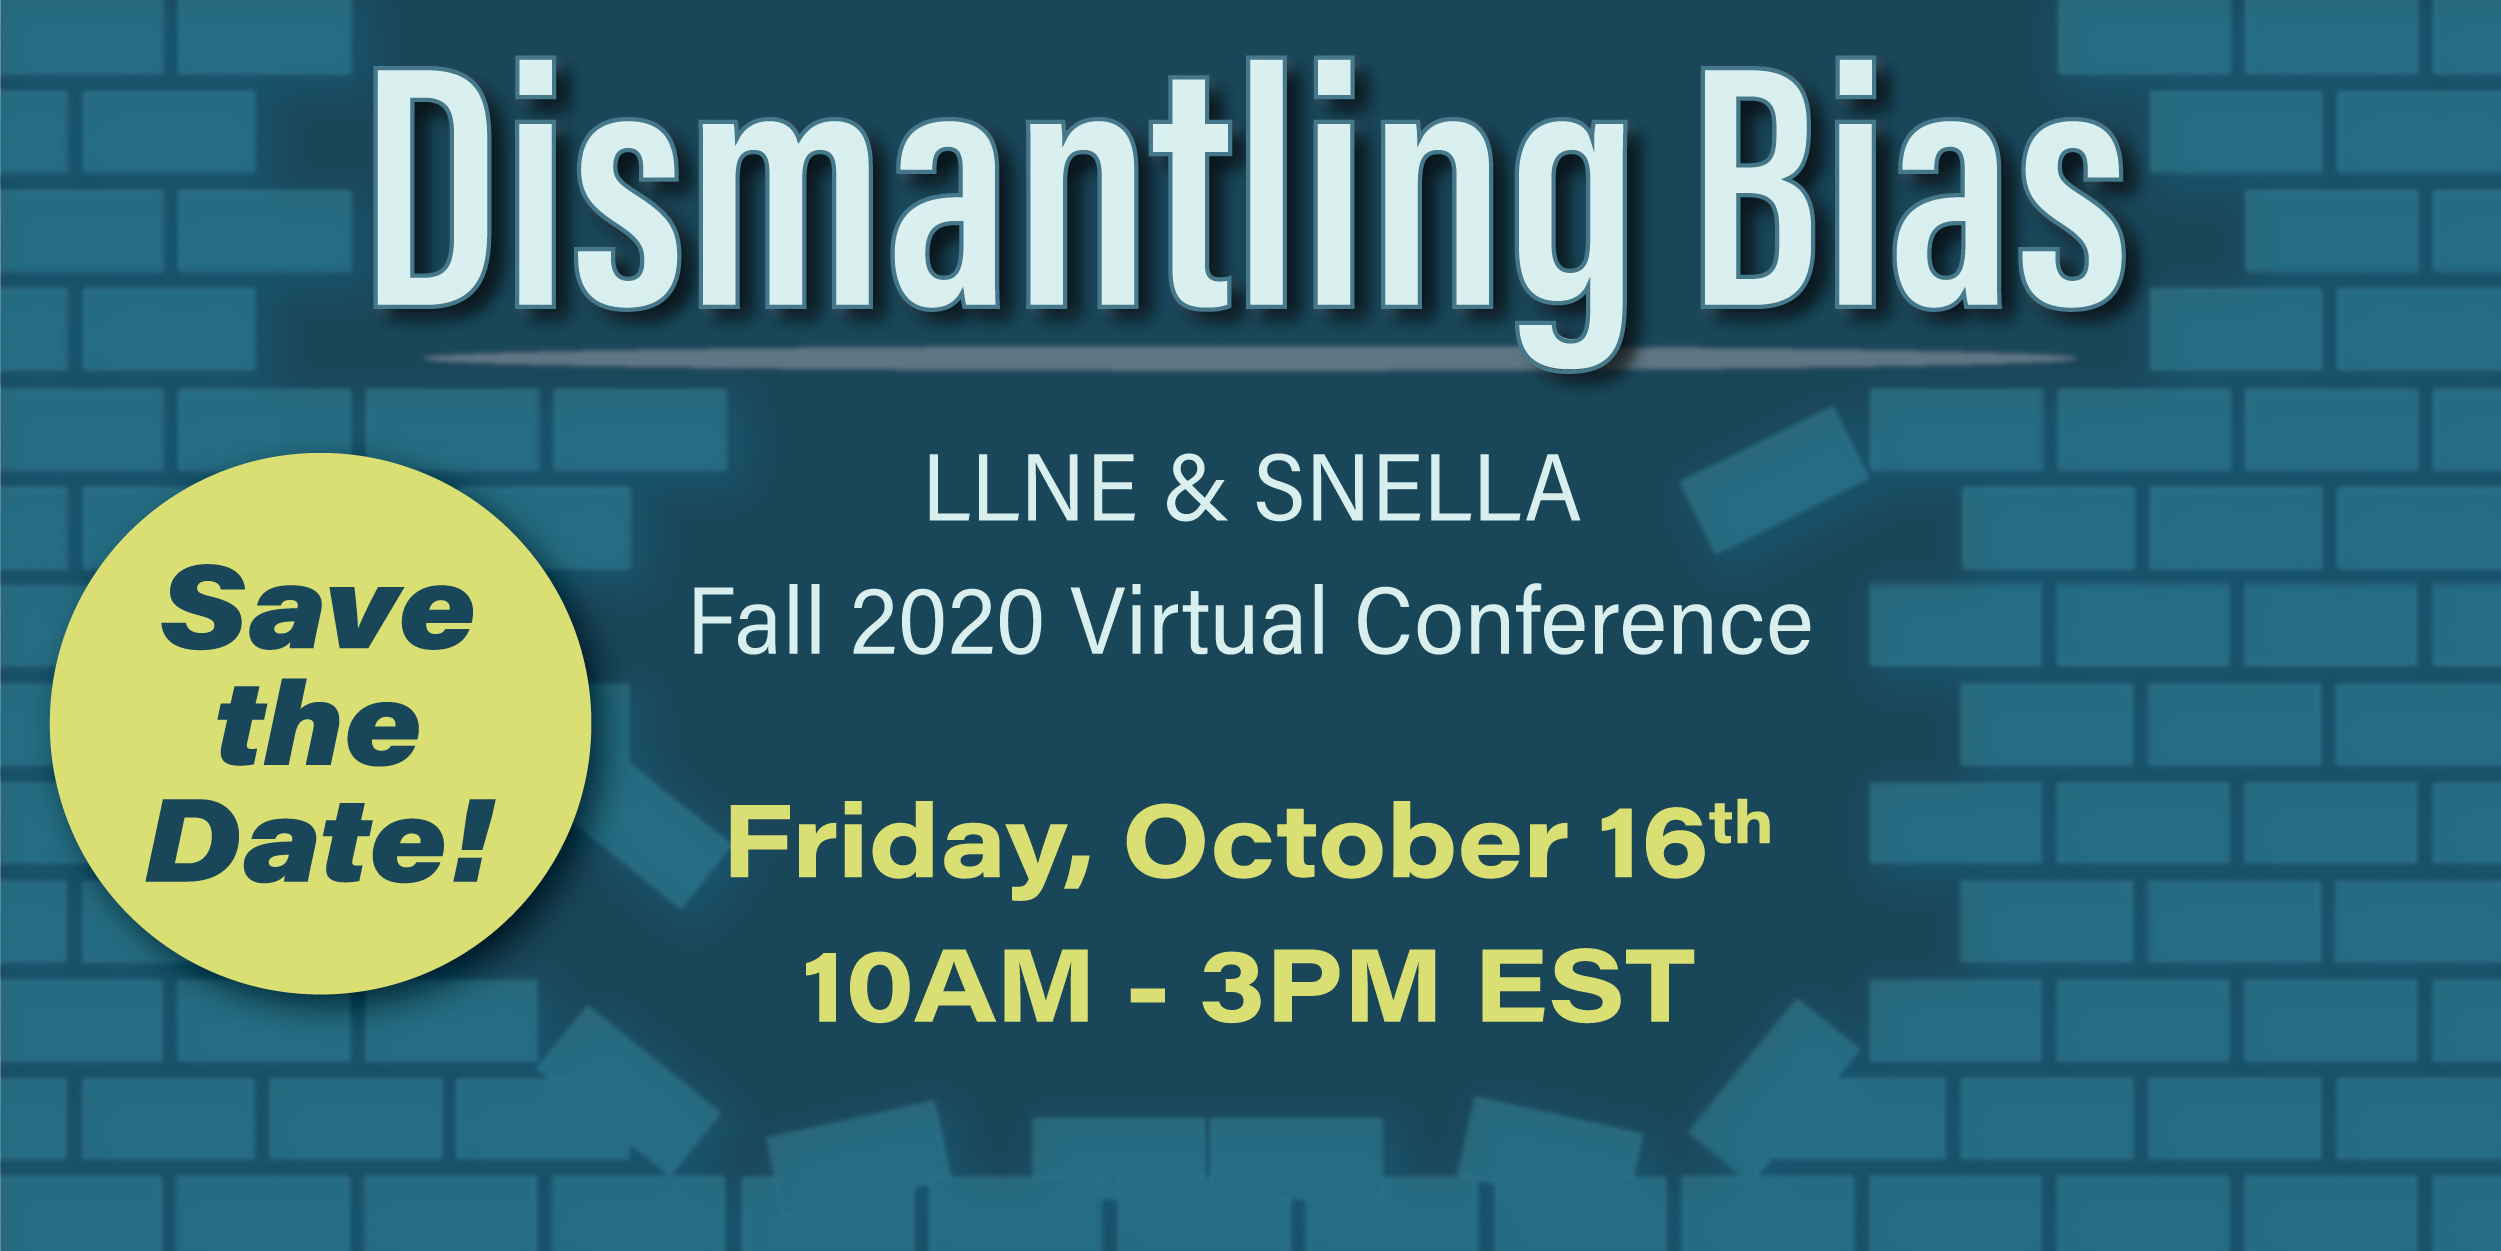 Fall 2020 Virtual Conference Save the Date